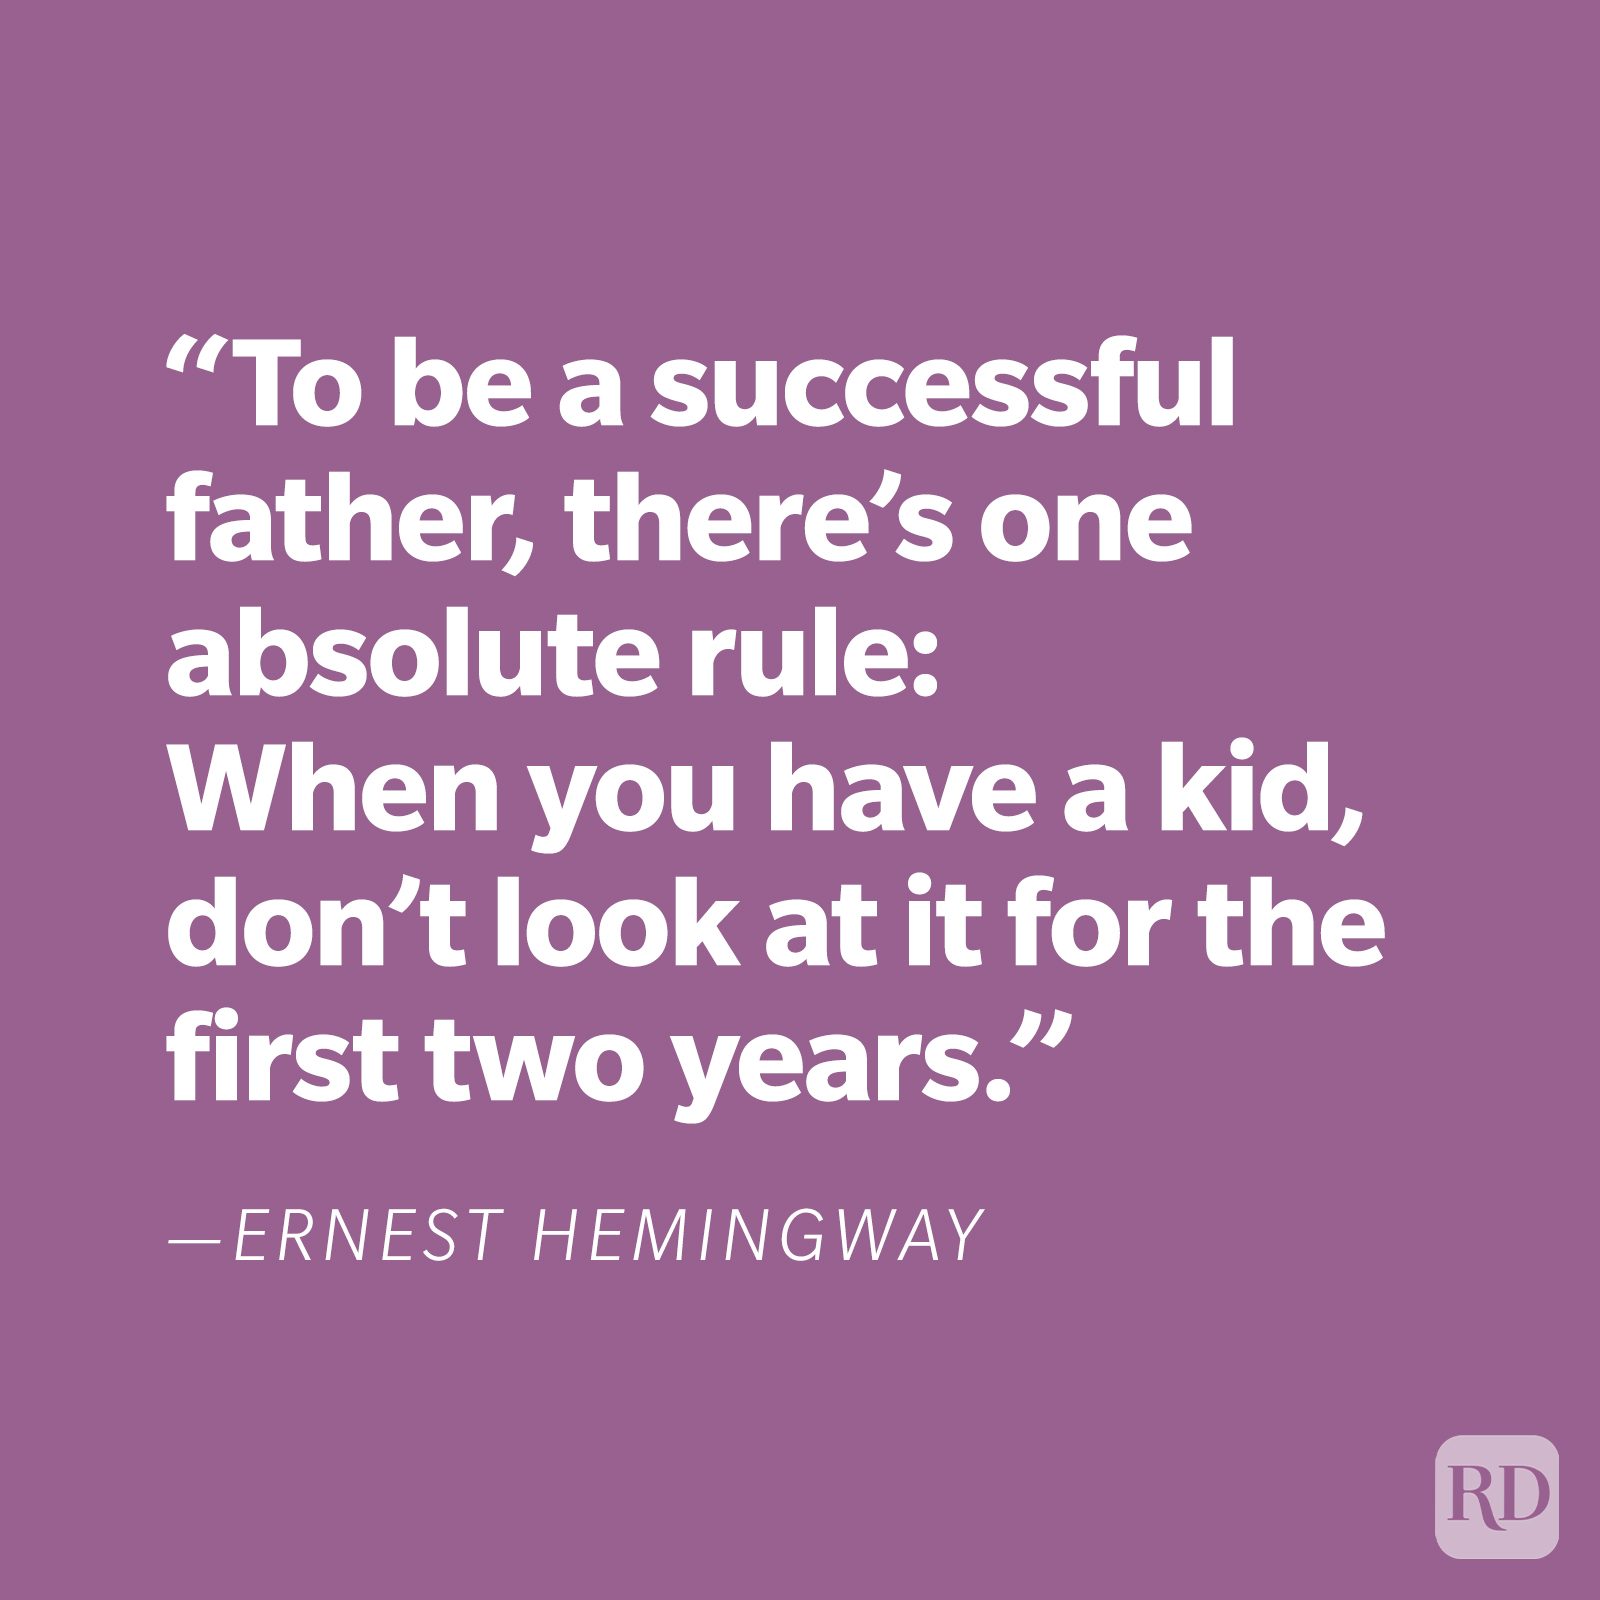 "To be a successful father, there's one absolute rule: When you have a kid, don't look at it for the first two years." —Ernest Hemingway